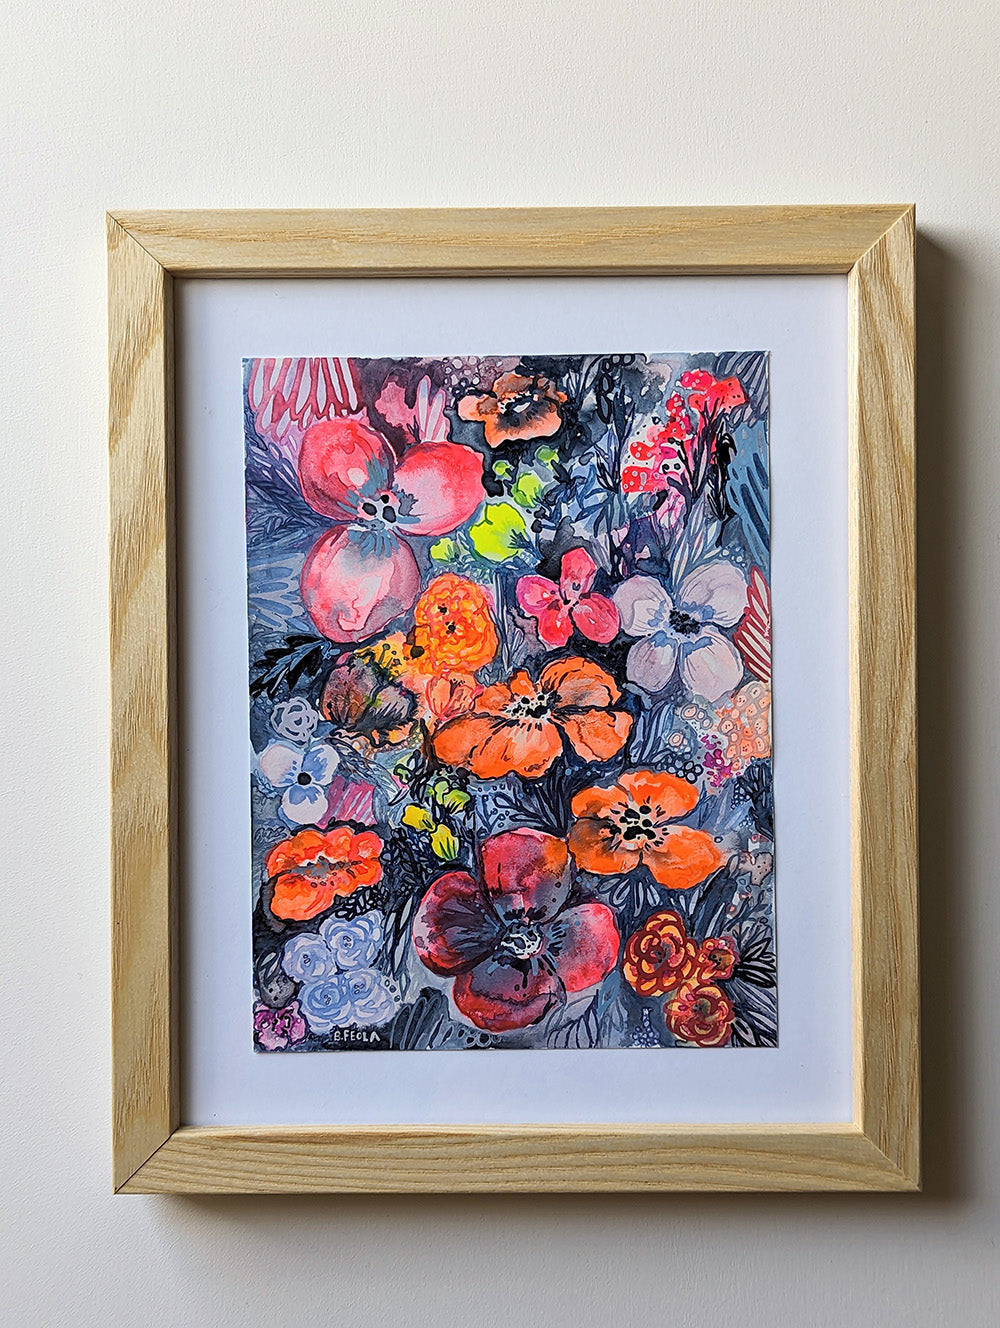 Neon Floral #1 - Original Painting by Briana Feola